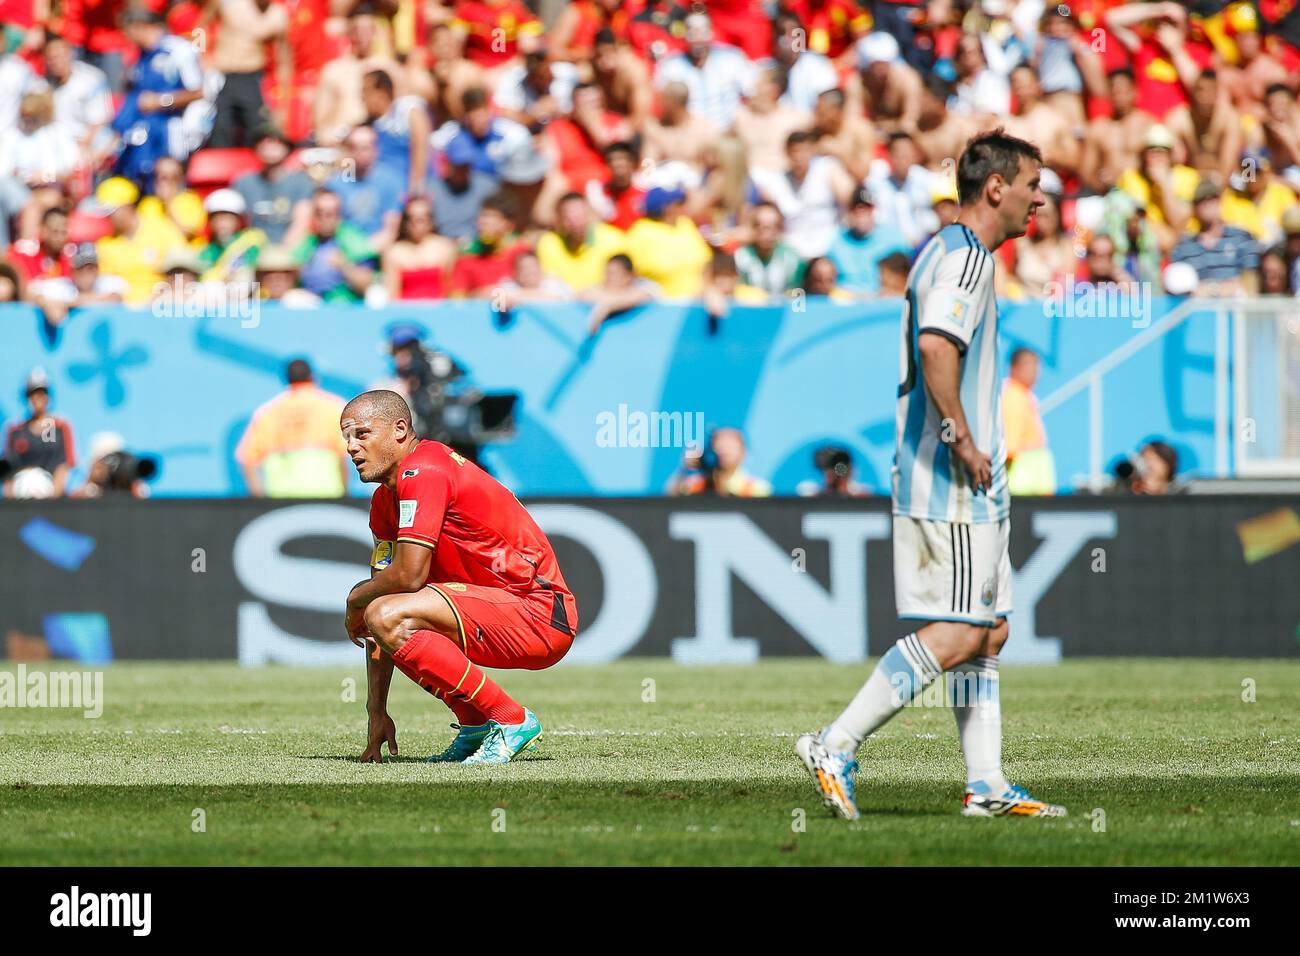 Belgium's captain Vincent Kompany looks dejected during the quarter final match between Belgian national soccer team Red Devils and Argentina, in Estadio Nacional Mane Garrincha, in Brasilia, Brazil, during the 2014 FIFA World Cup, Saturday 05 July 2014. BELGA PHOTO BRUNO FAHY Stock Photo